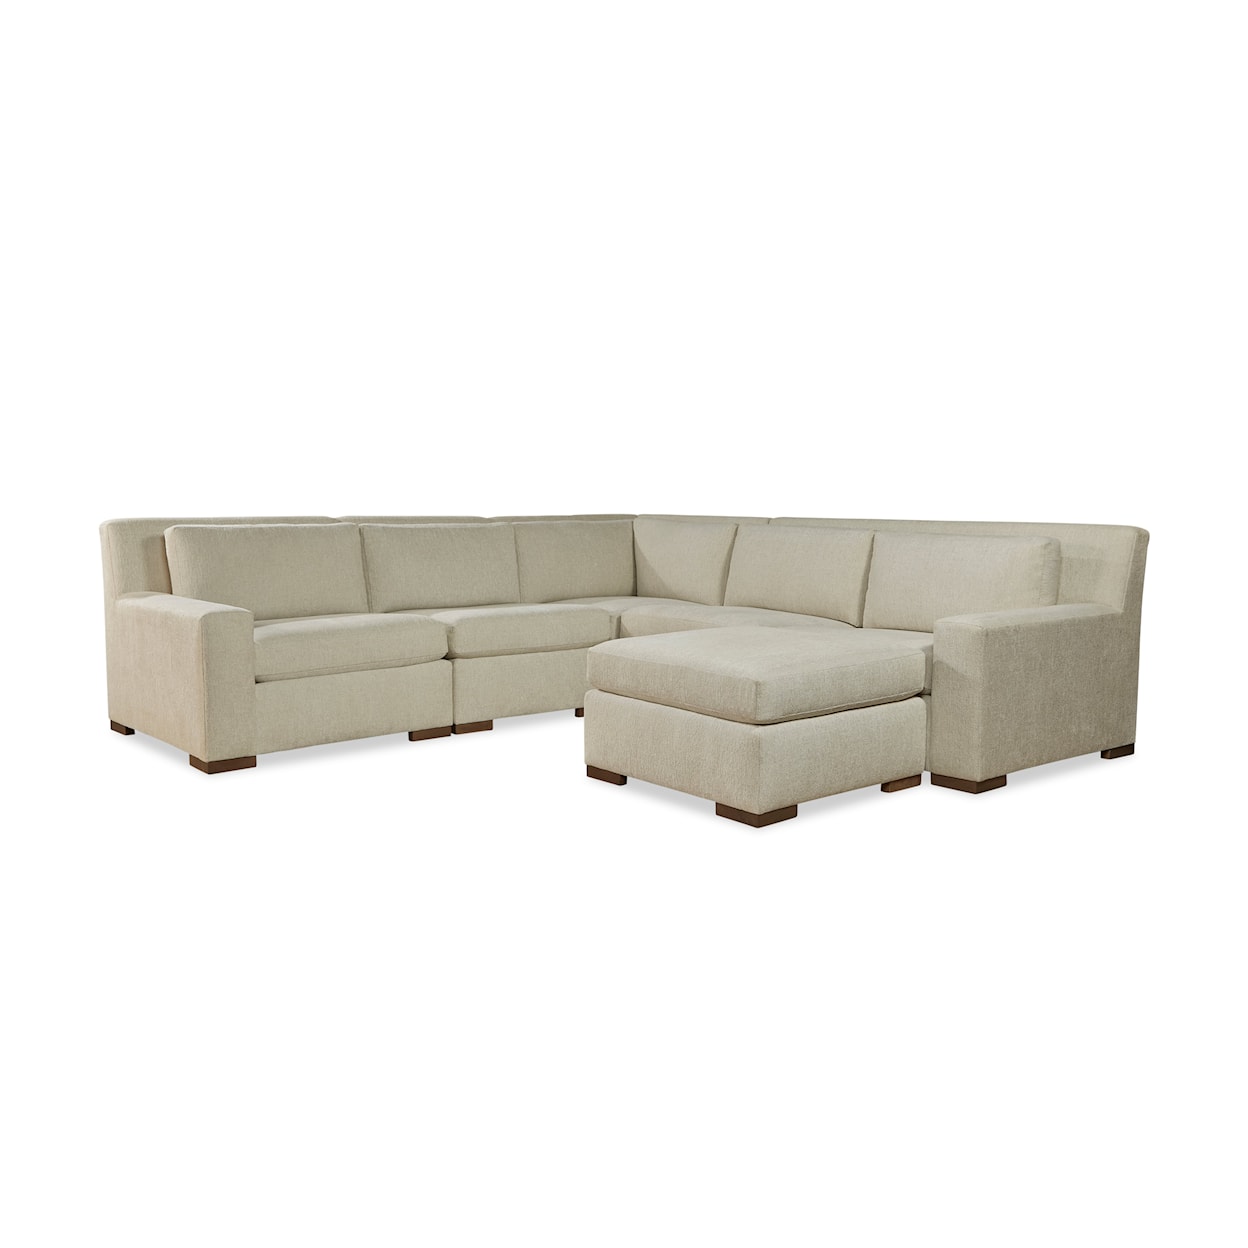 Huntington House 7296 COLLECTION 5-Piece Chaise Sectional